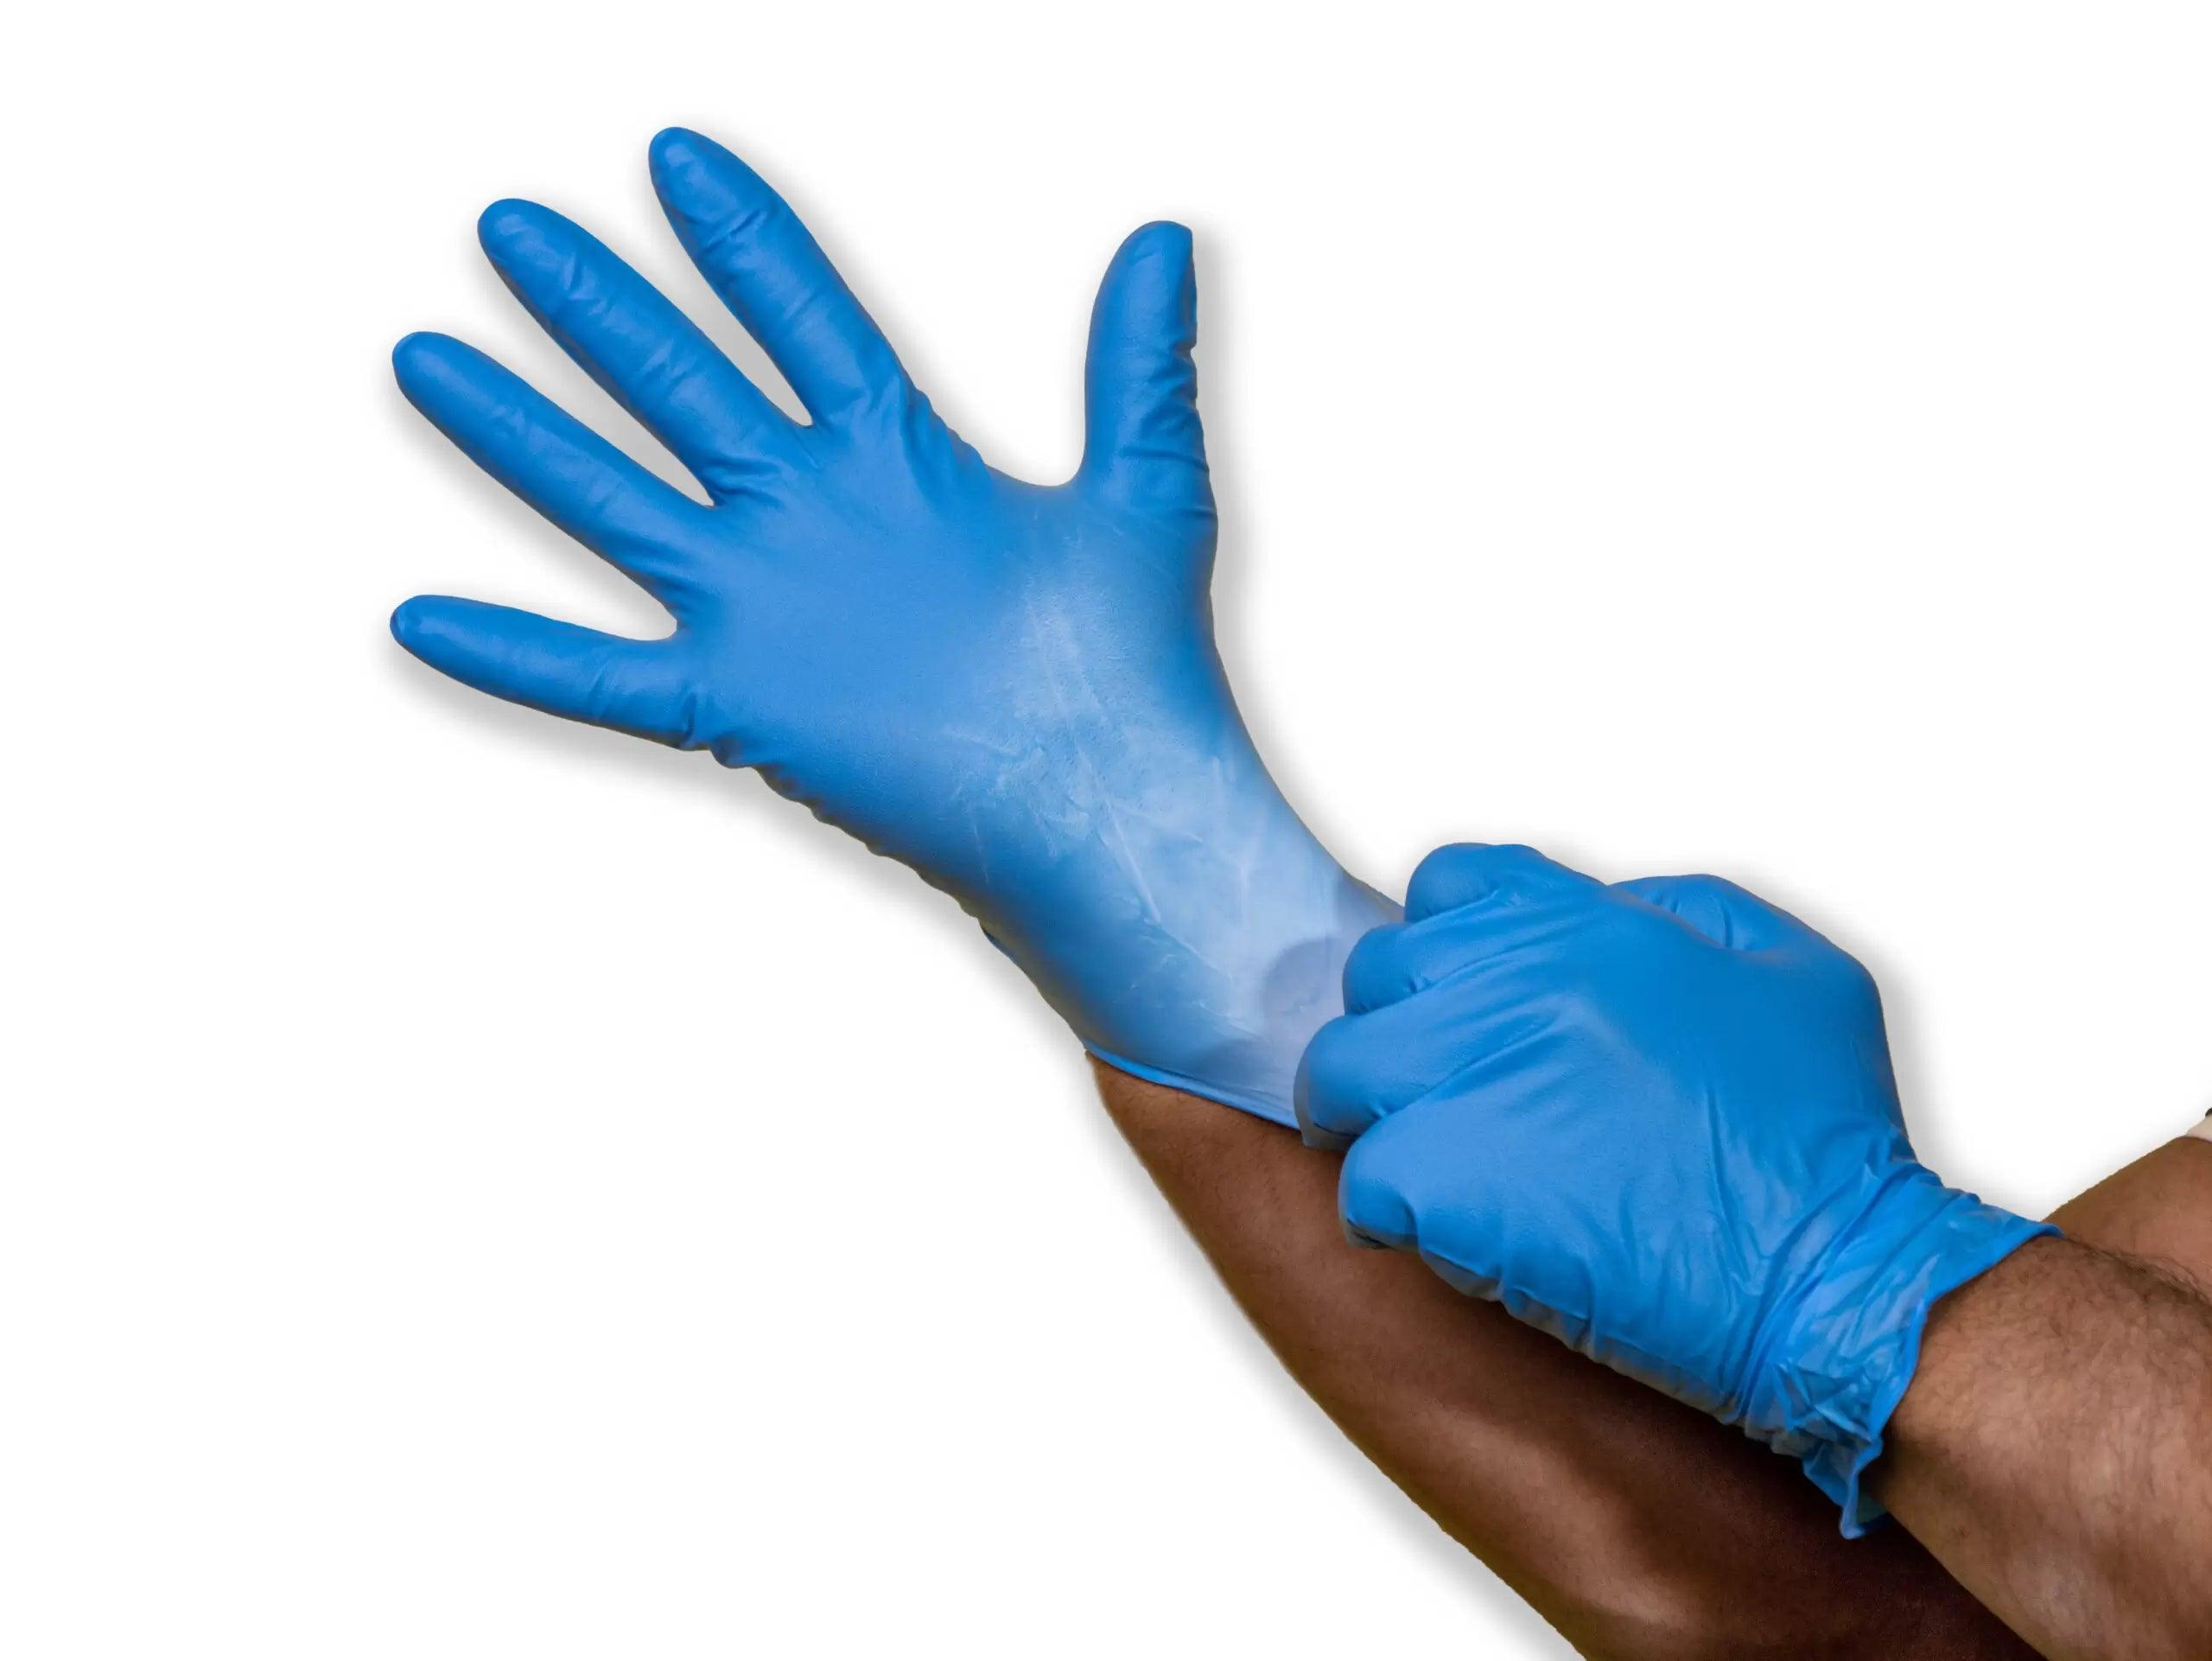 Grizzly Grip Nitrile Gloves - Heavy Duty - Blue (8mil)